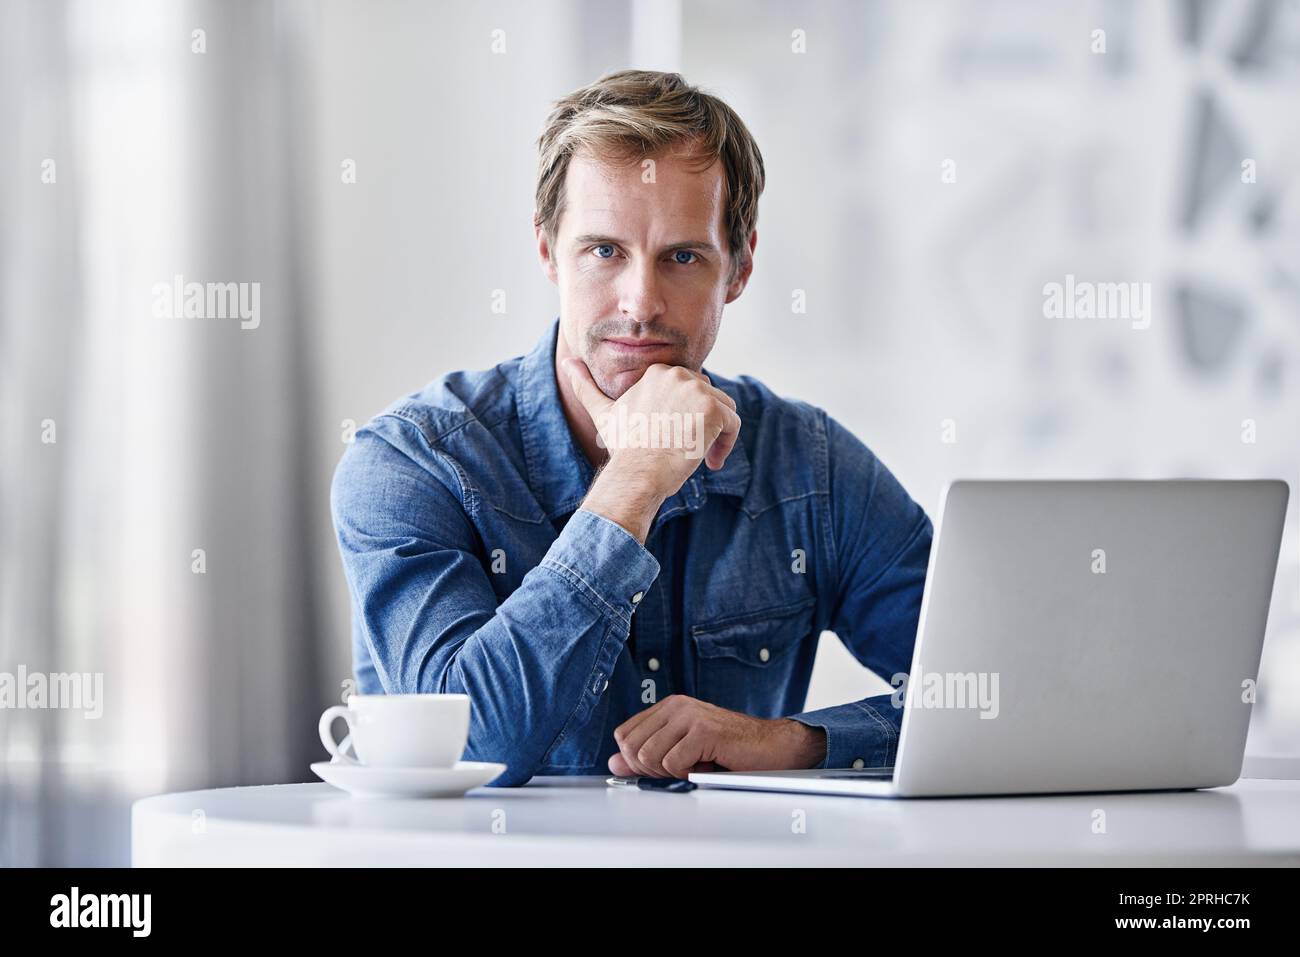 His success is based on his actions. Portrait of a mature businessman using a laptop while sitting at a desk in an office. Stock Photo